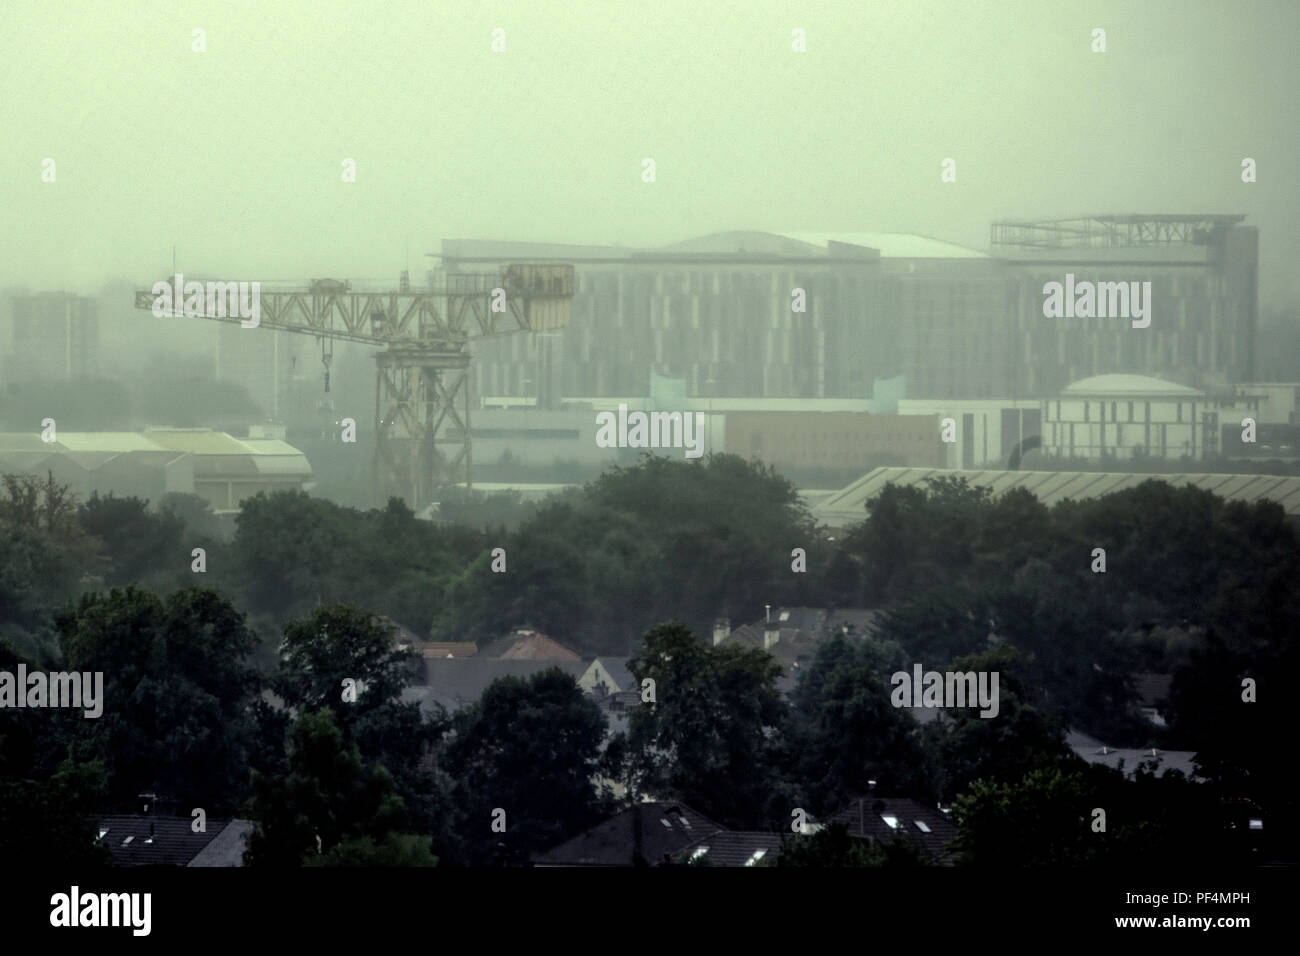 Glasgow, Scotland, UK. 19th August, 2018. UK Weather: Overcast sky as storm Ernesto is due over the town as heavy rain and mist  is forecast through the day.No distant skyline as the city’s landmarks are ghosted behind the suburban semi detached of Knightswood. Gerard Ferry/Alamy news Stock Photo